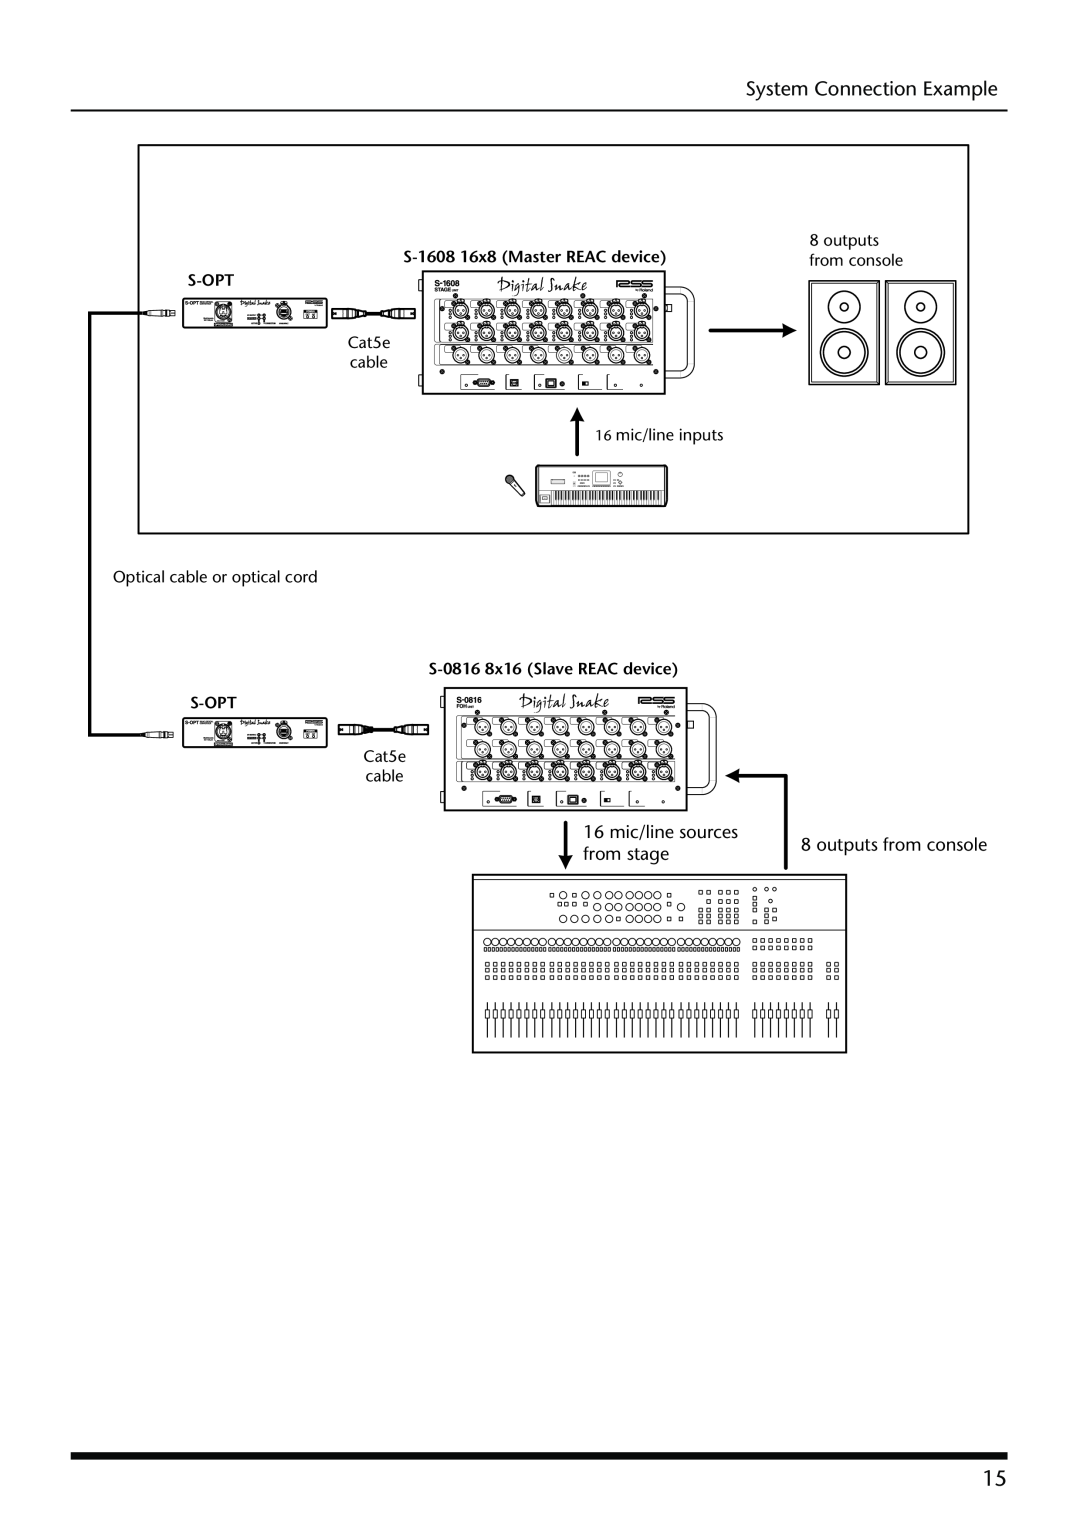 Roland S-OPT owner manual System Connection Example, 16 mic/line sources from stage, outputs from console 